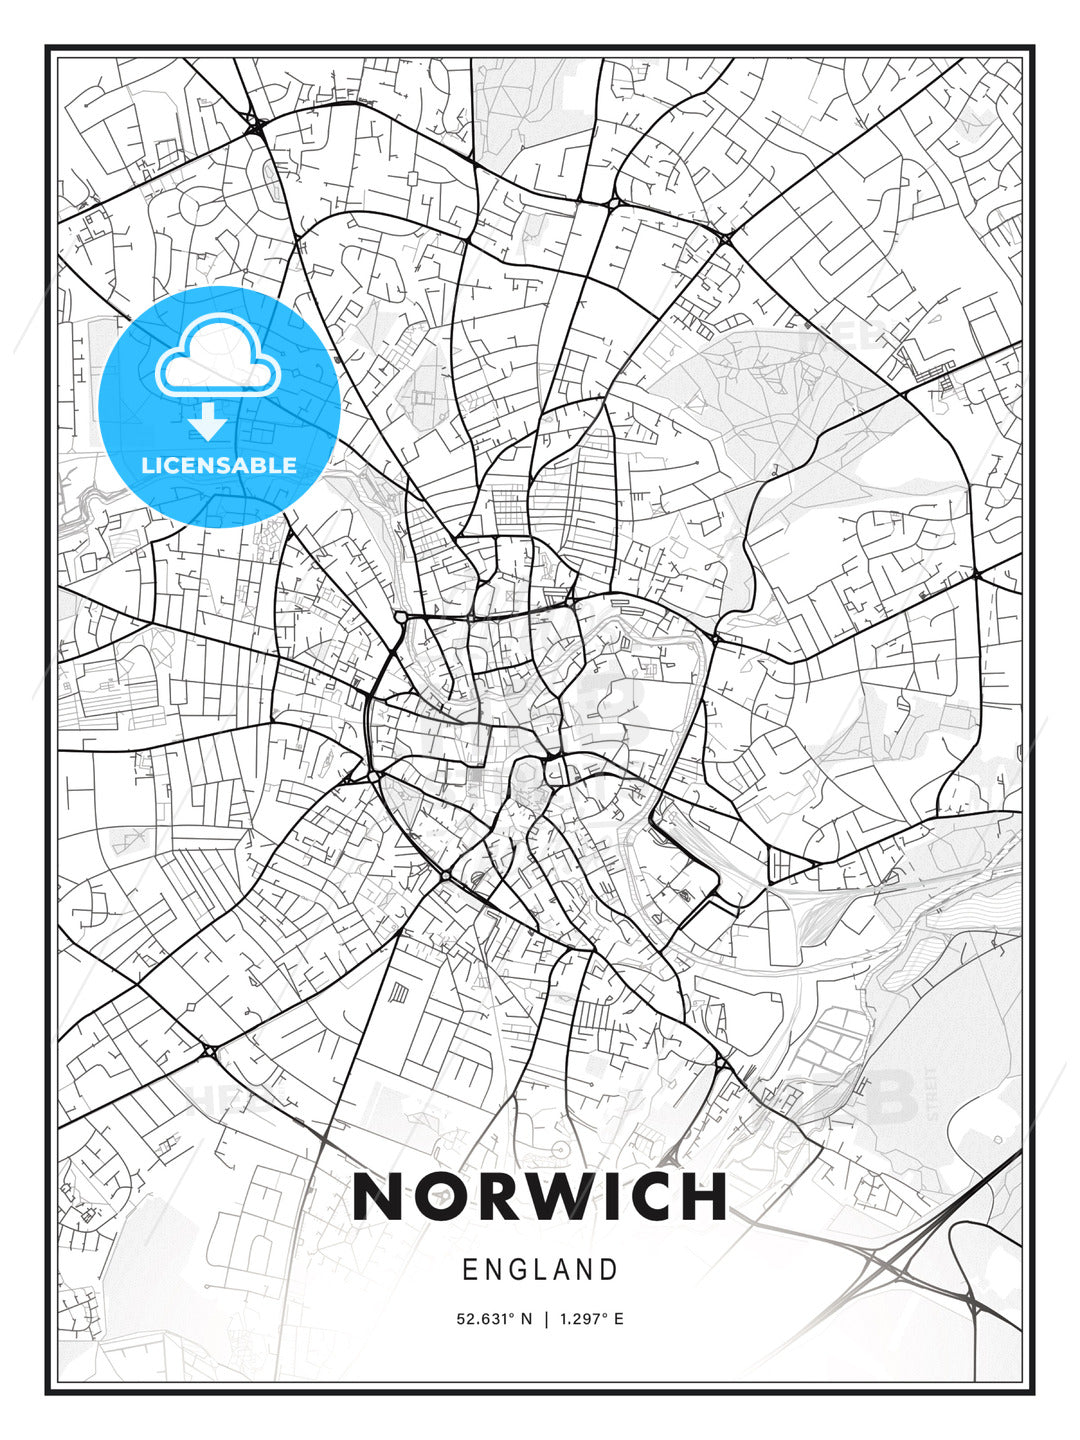 Norwich, England, Modern Print Template in Various Formats - HEBSTREITS Sketches